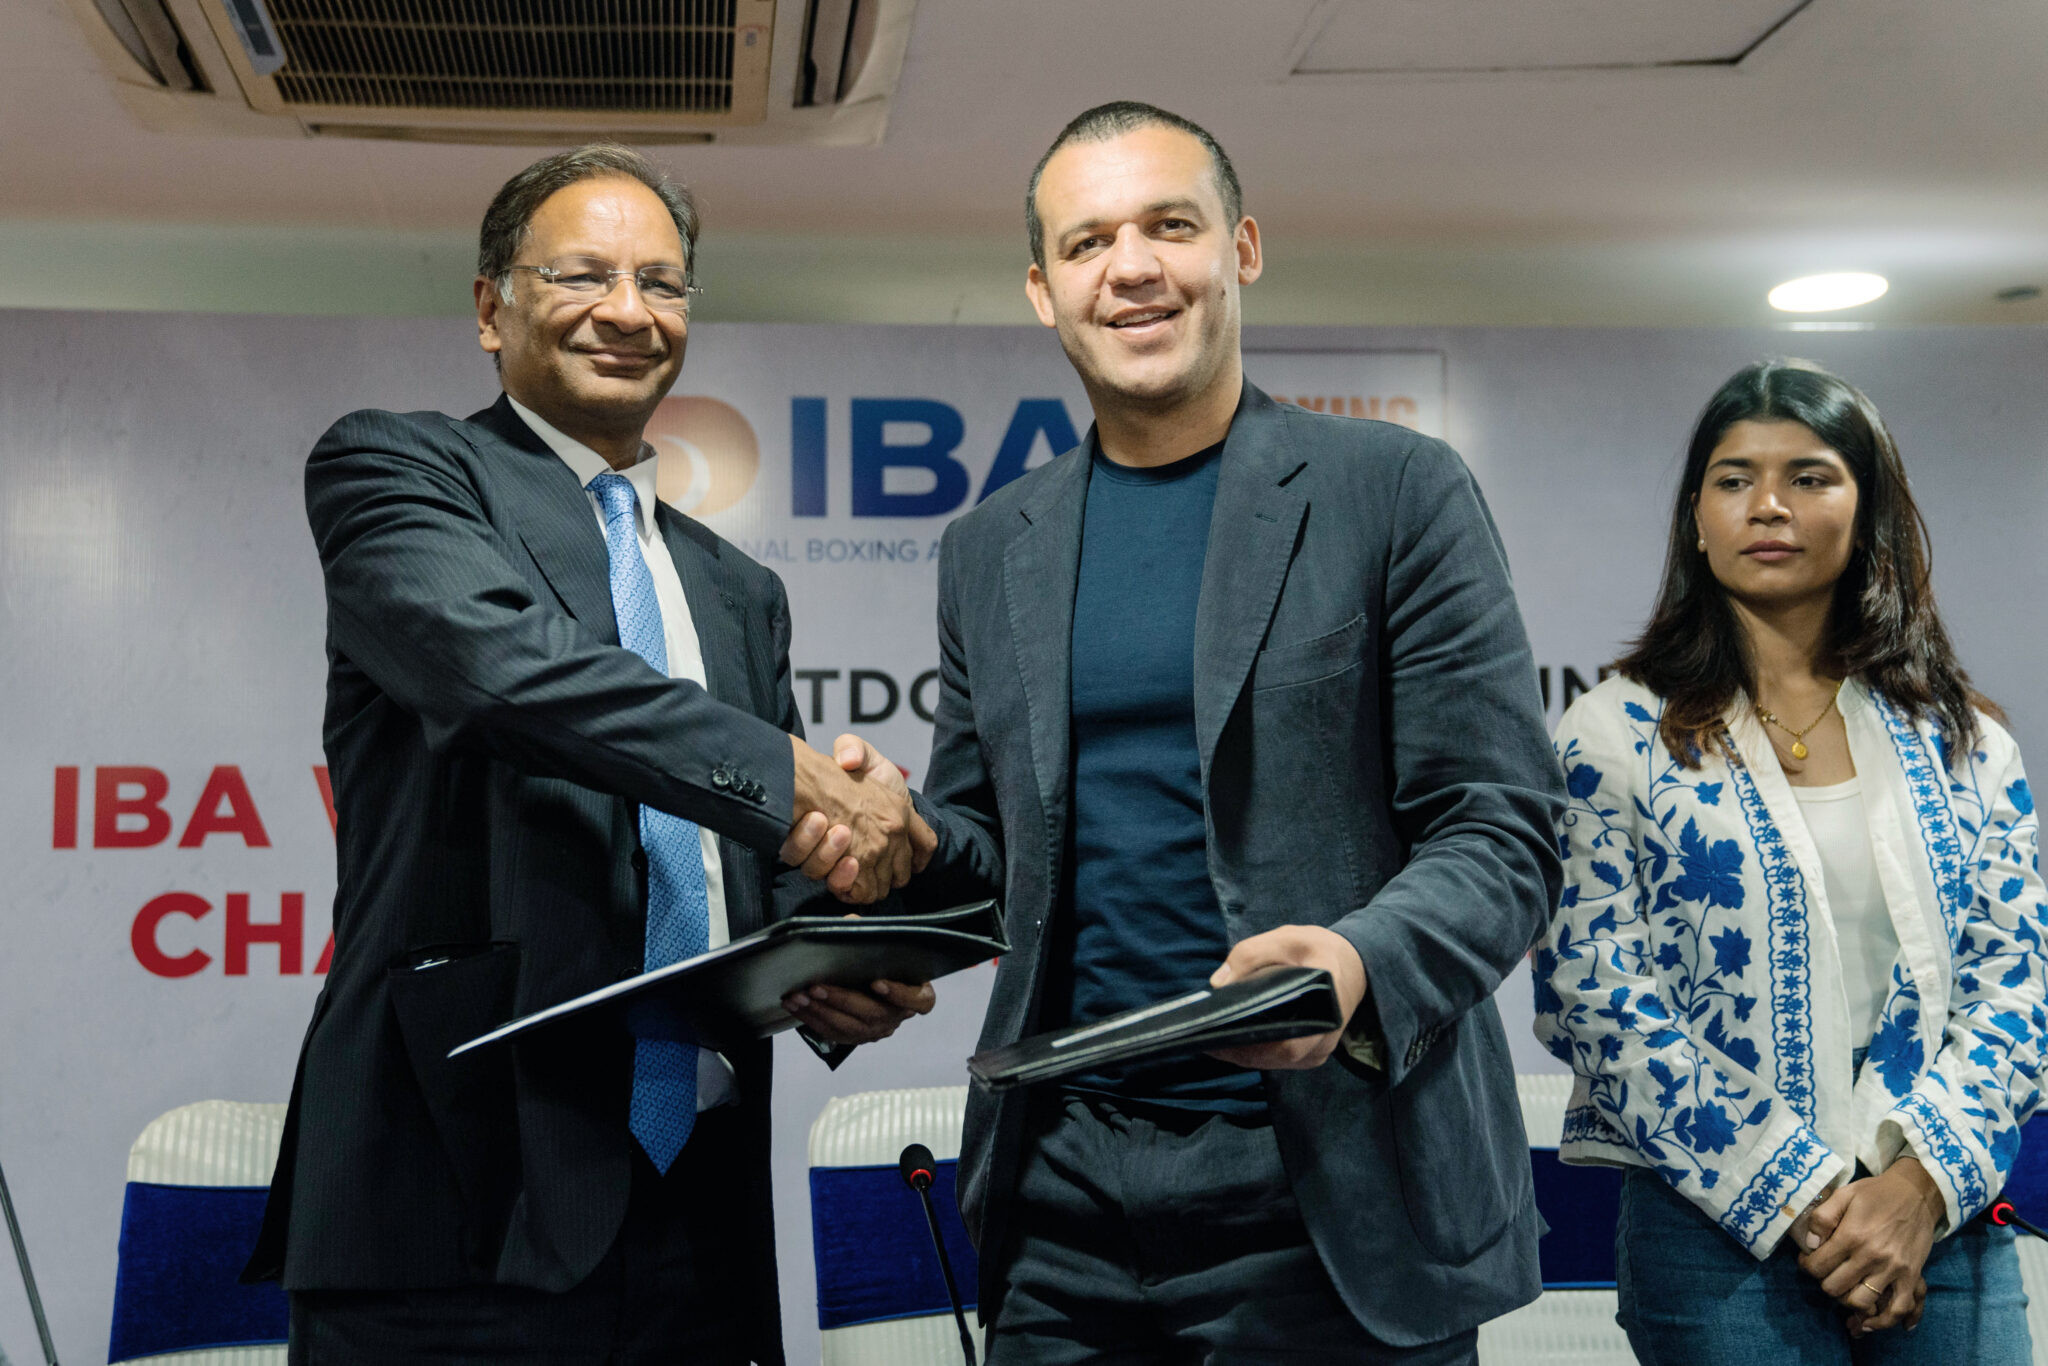 New Delhi in India has been announced as the host of the 2023 IBA Women's World Championships ©IBA